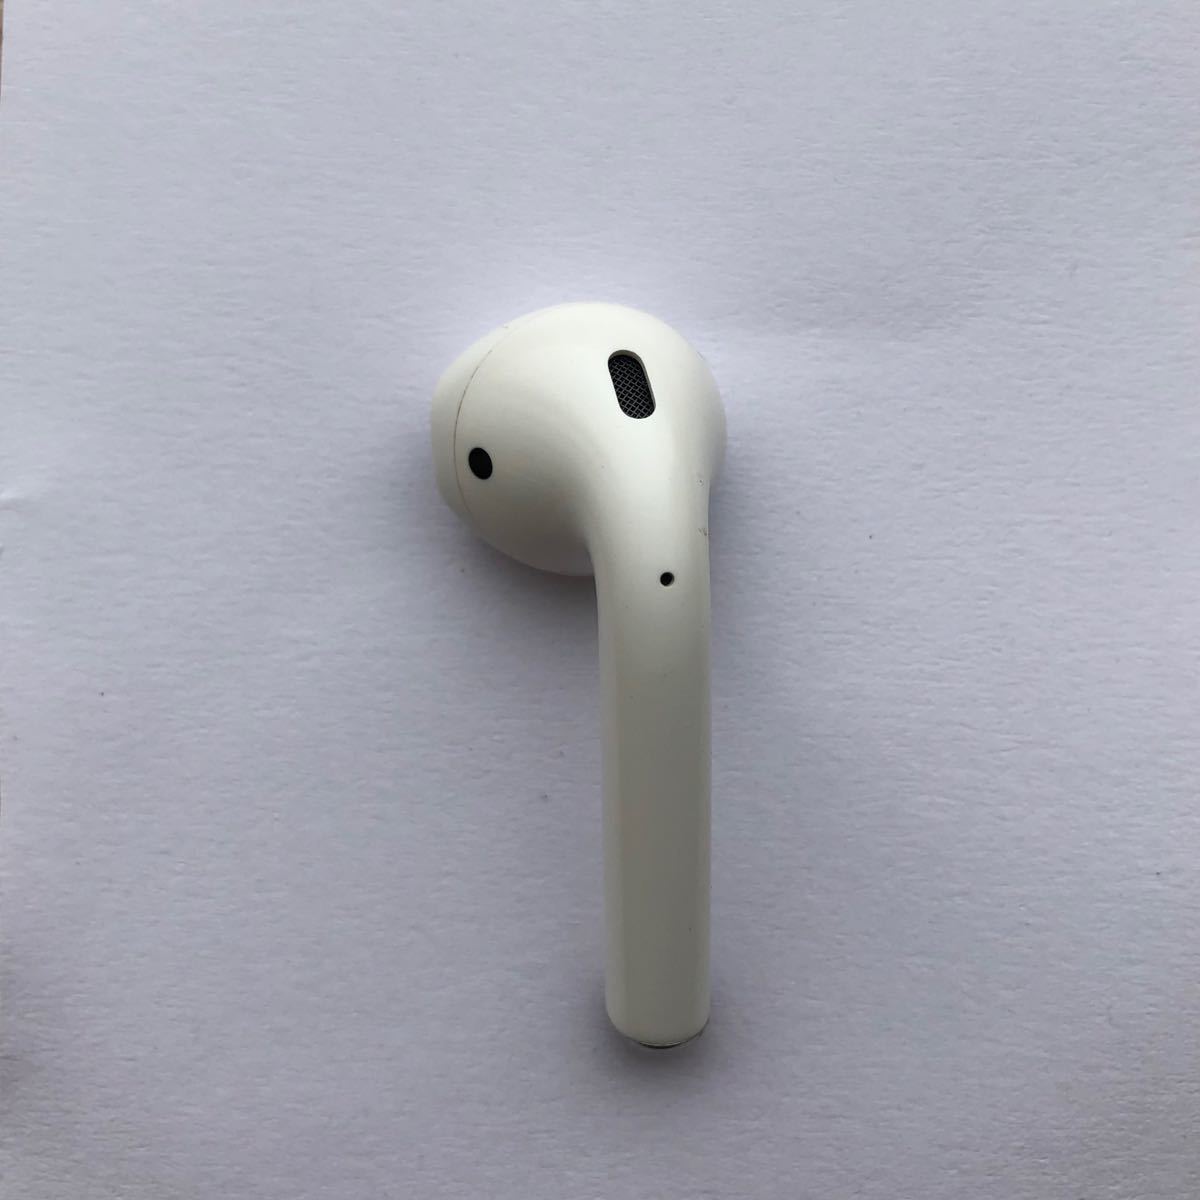 AirPods 2世代 片耳 L 片方 左耳 エアーポッズ｜PayPayフリマ